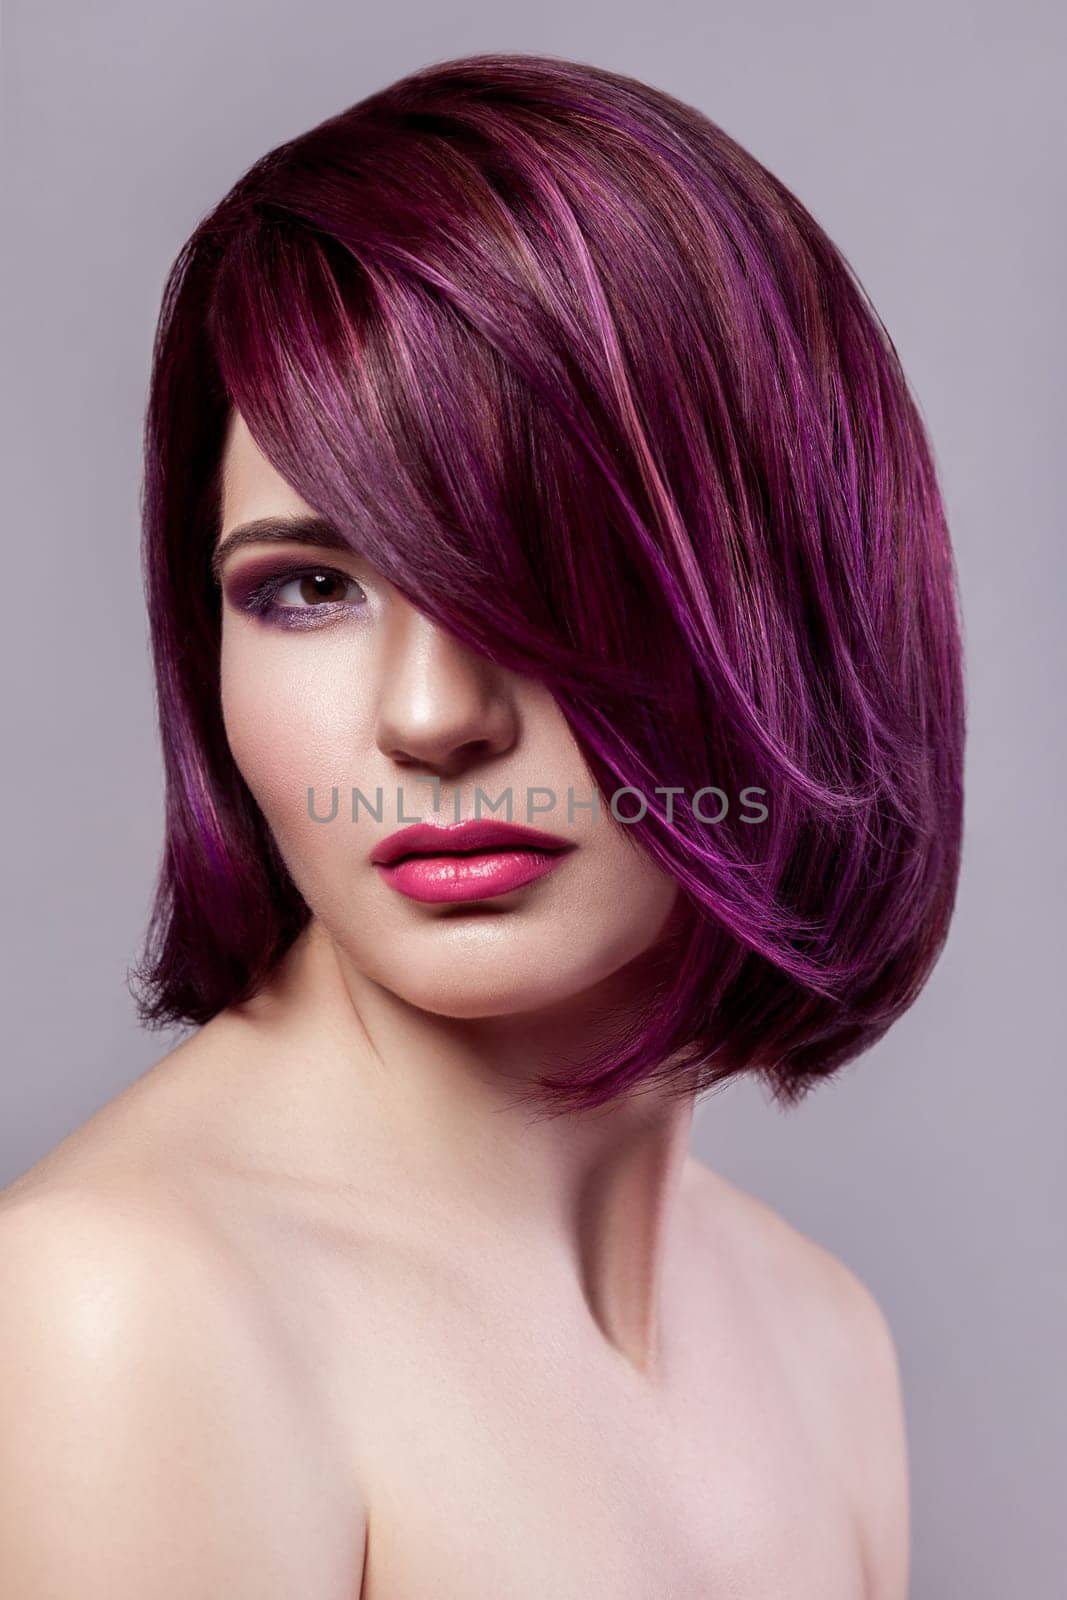 Beautiful woman with short purple colored hairstyle and makeup looks at camera with calm expression. by Khosro1